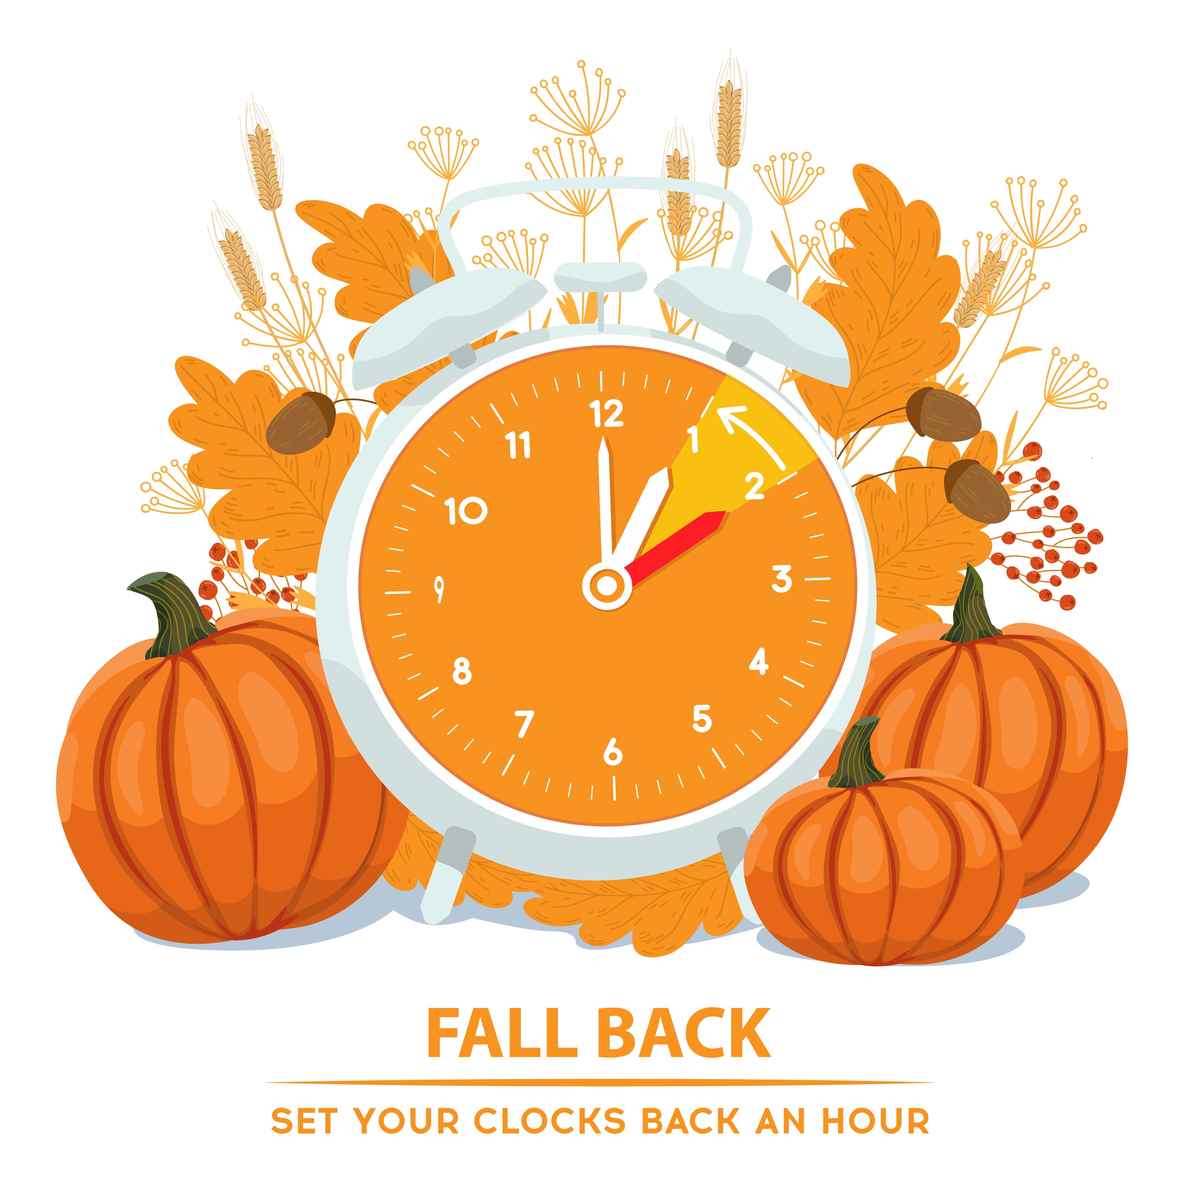 An orange cartoon alarm clock changing to daylight saving time, next to pumpkins with the words "fall back set your clocks back an hour" beneath it.